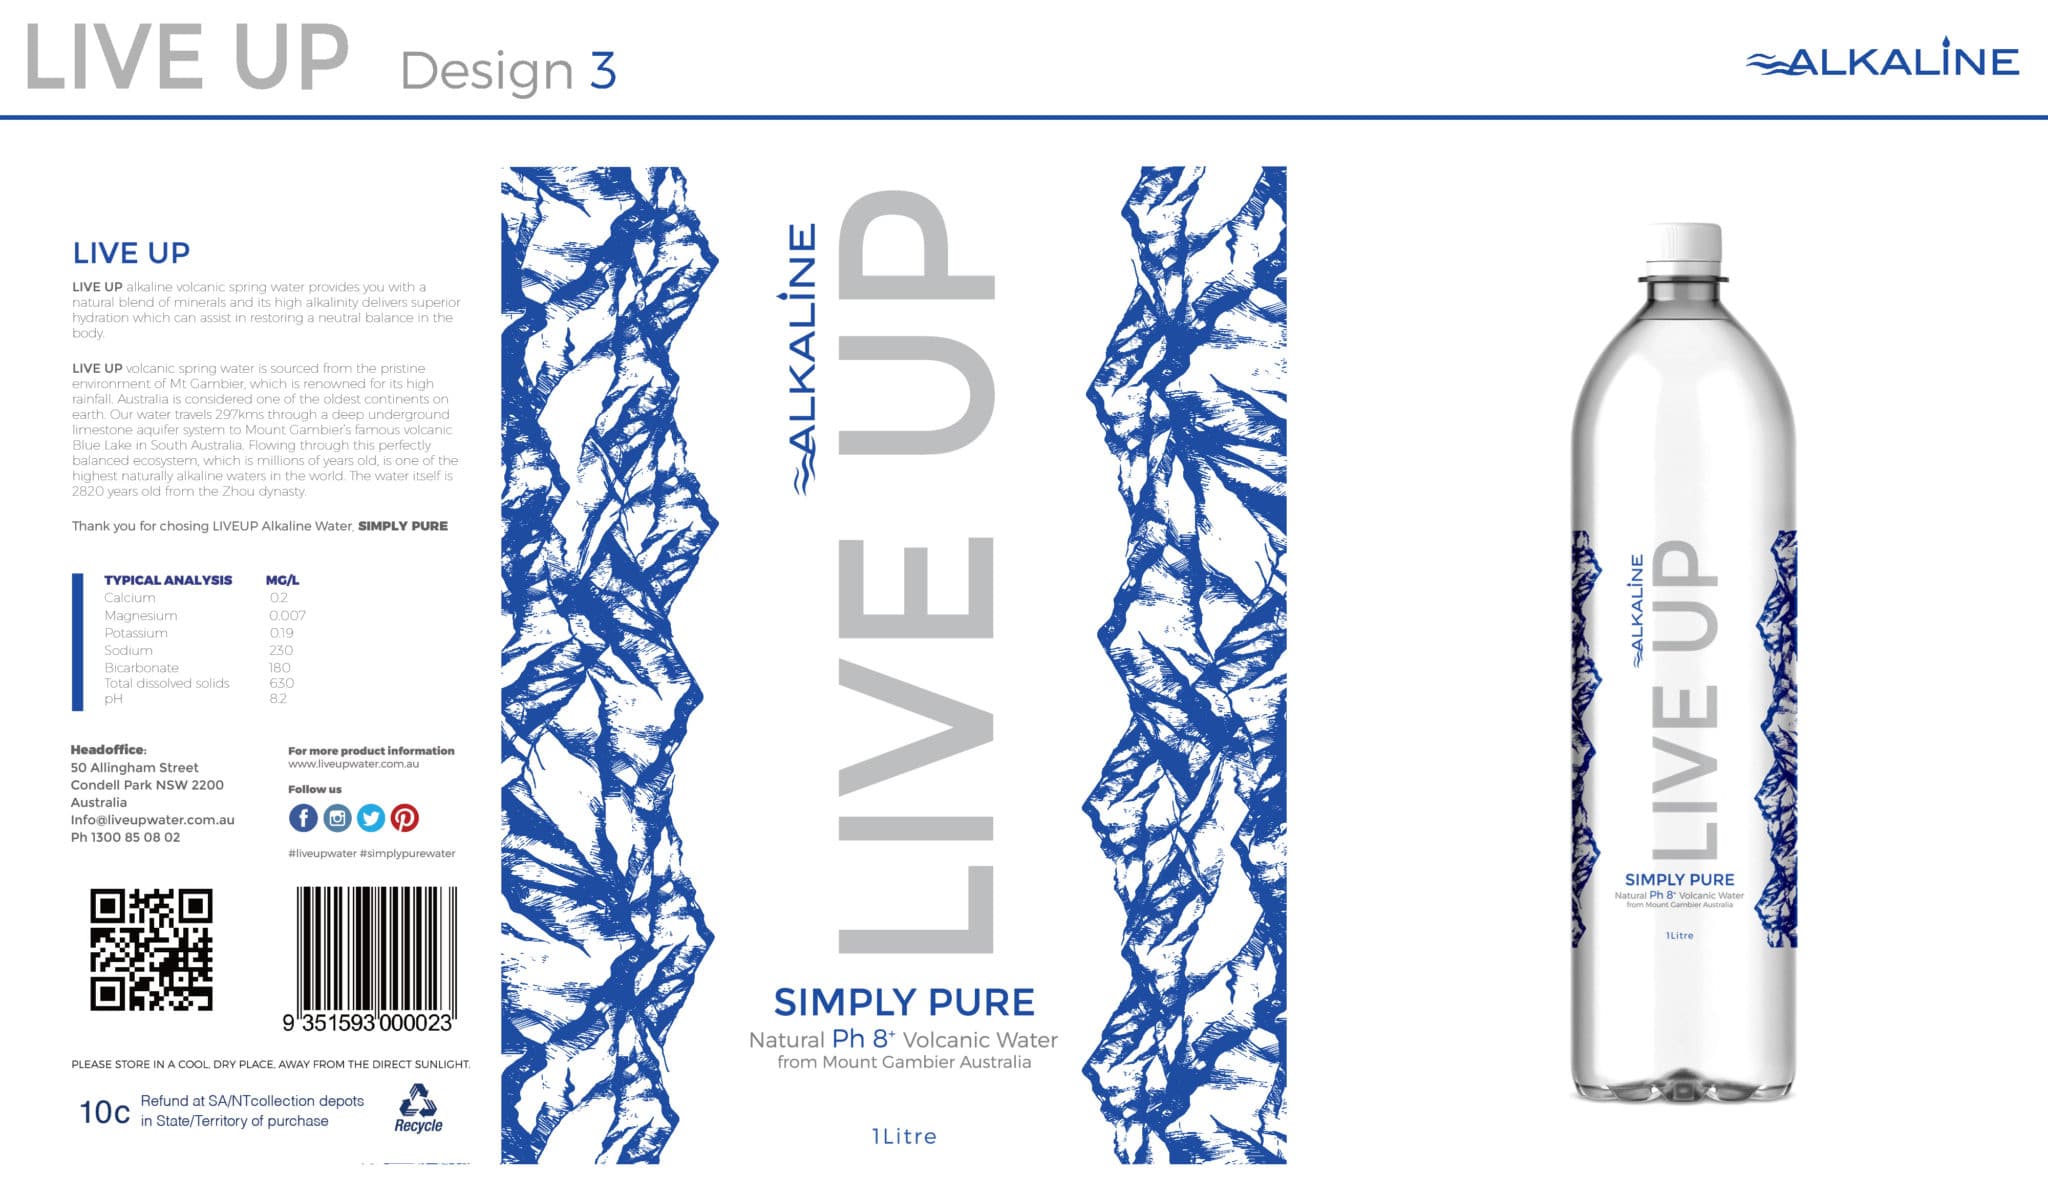 Graphic design of a alkaline water bottle with label and water bottle